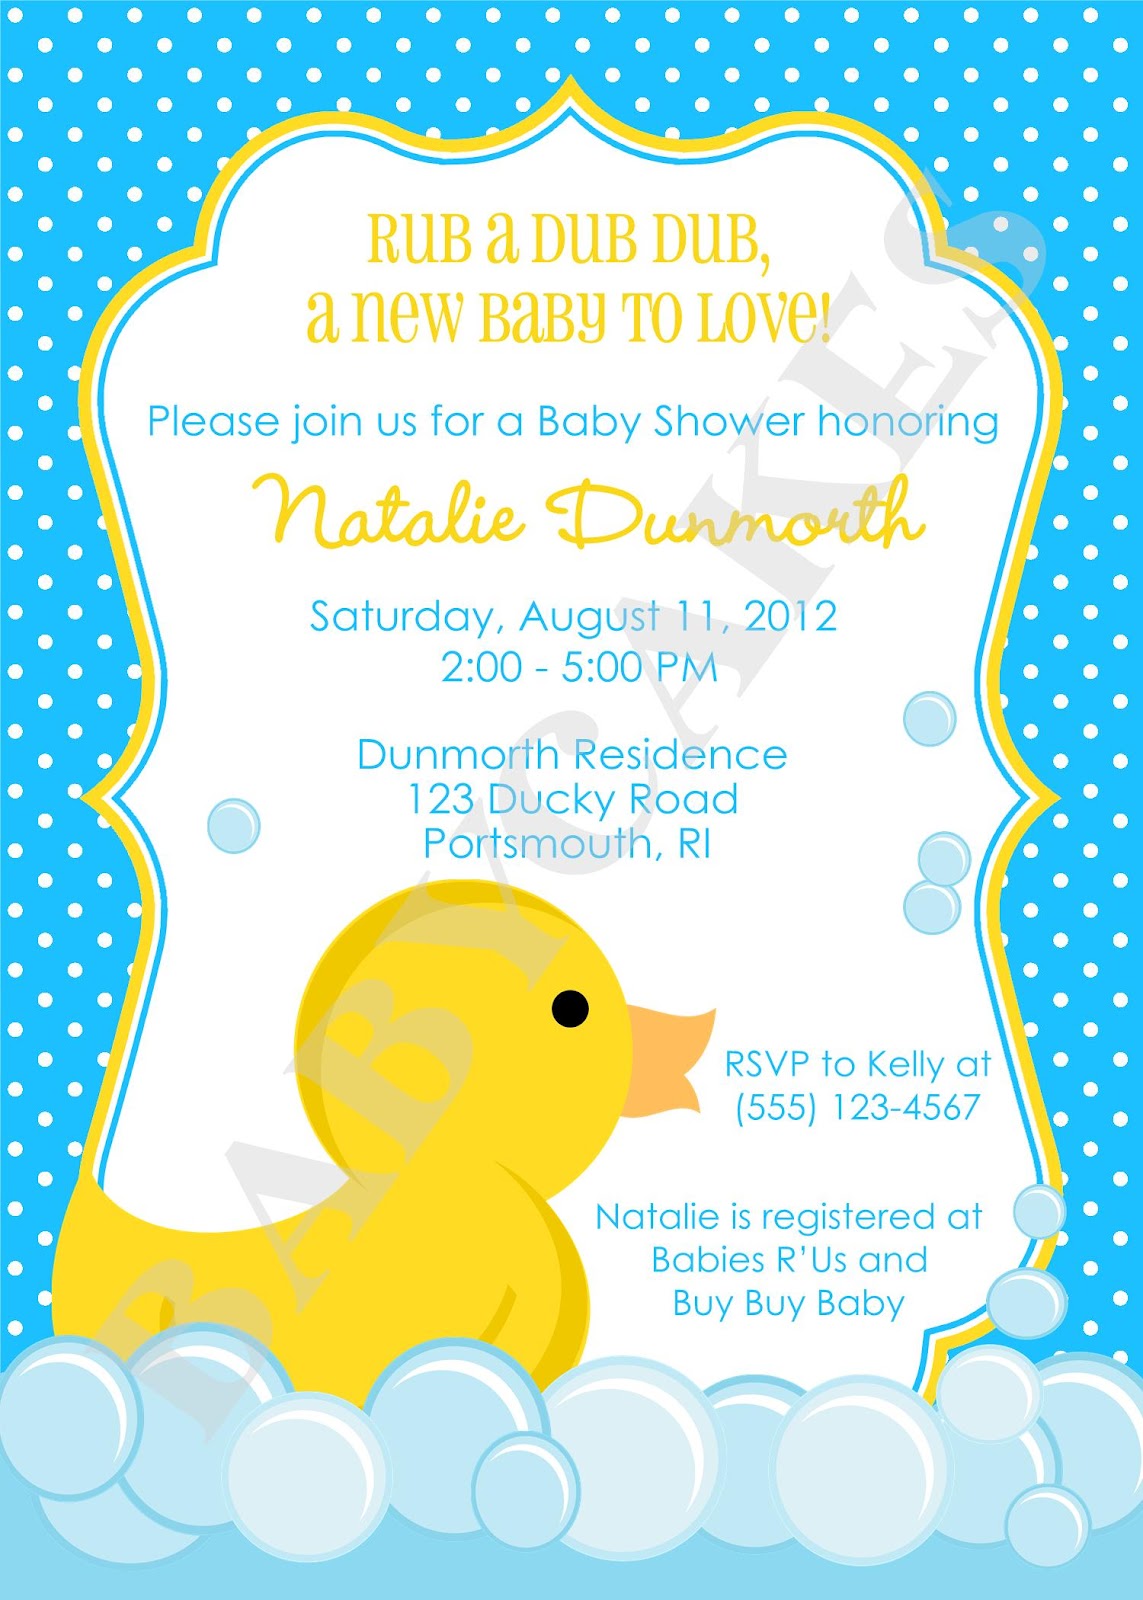 baby-shower-invitation-free-printable-rubber-duck-baby-shower-invitations